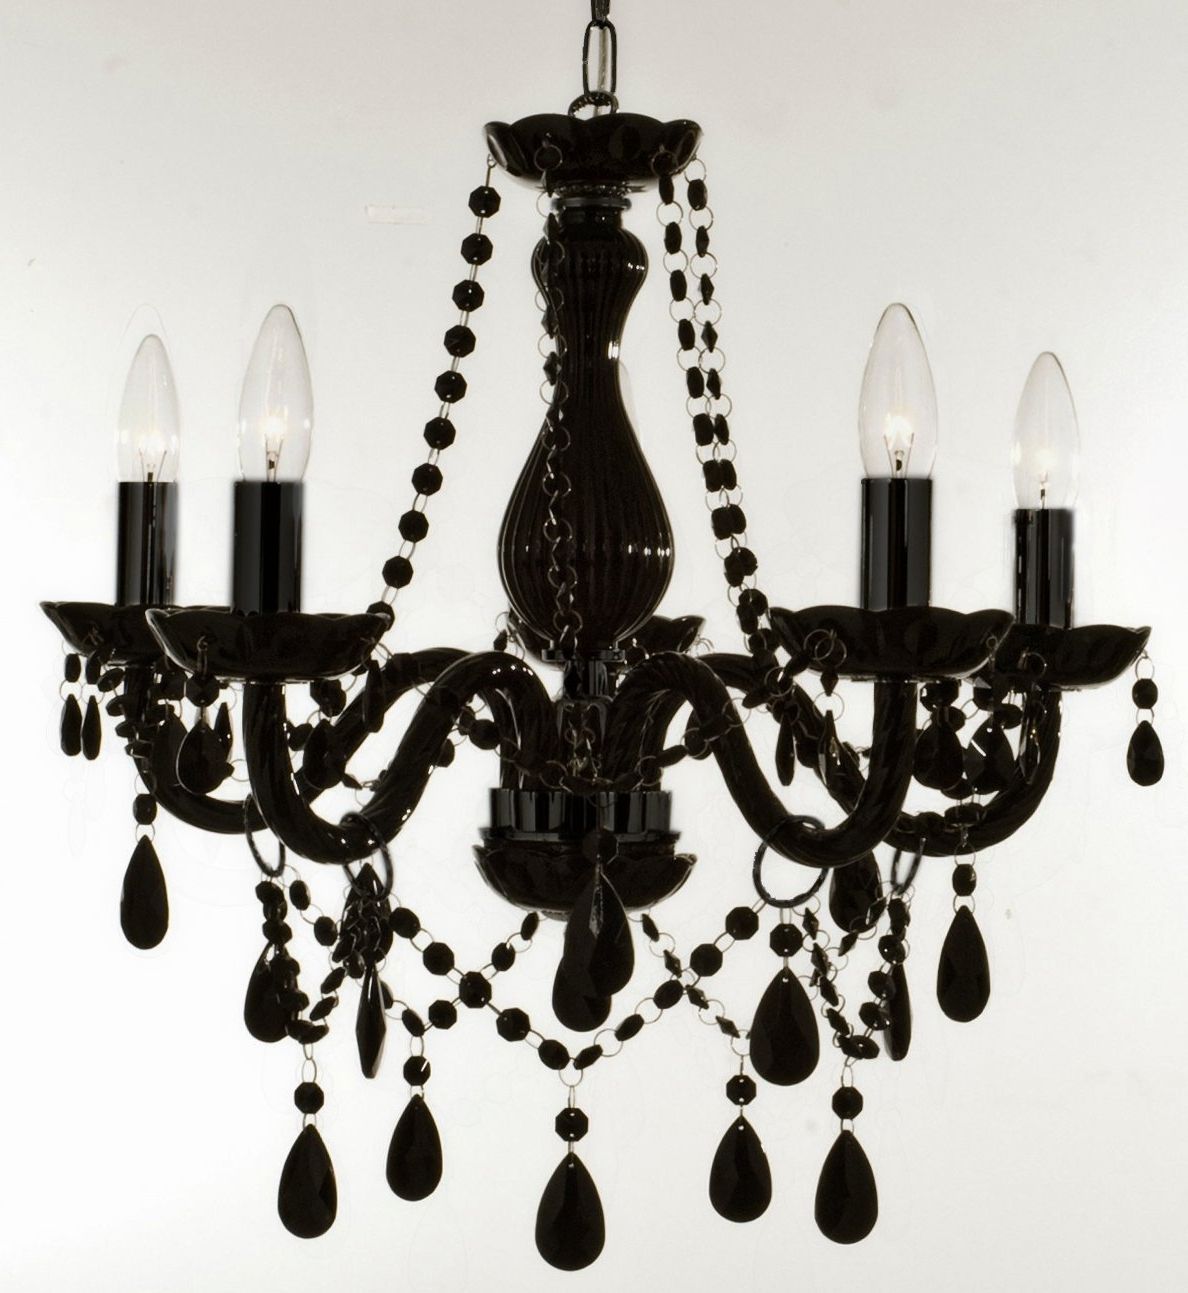 Chandeliers Design : Wonderful Black Wrought Iron Candle Chandelier Inside Most Recently Released Hanging Candelabra Chandeliers (View 10 of 20)